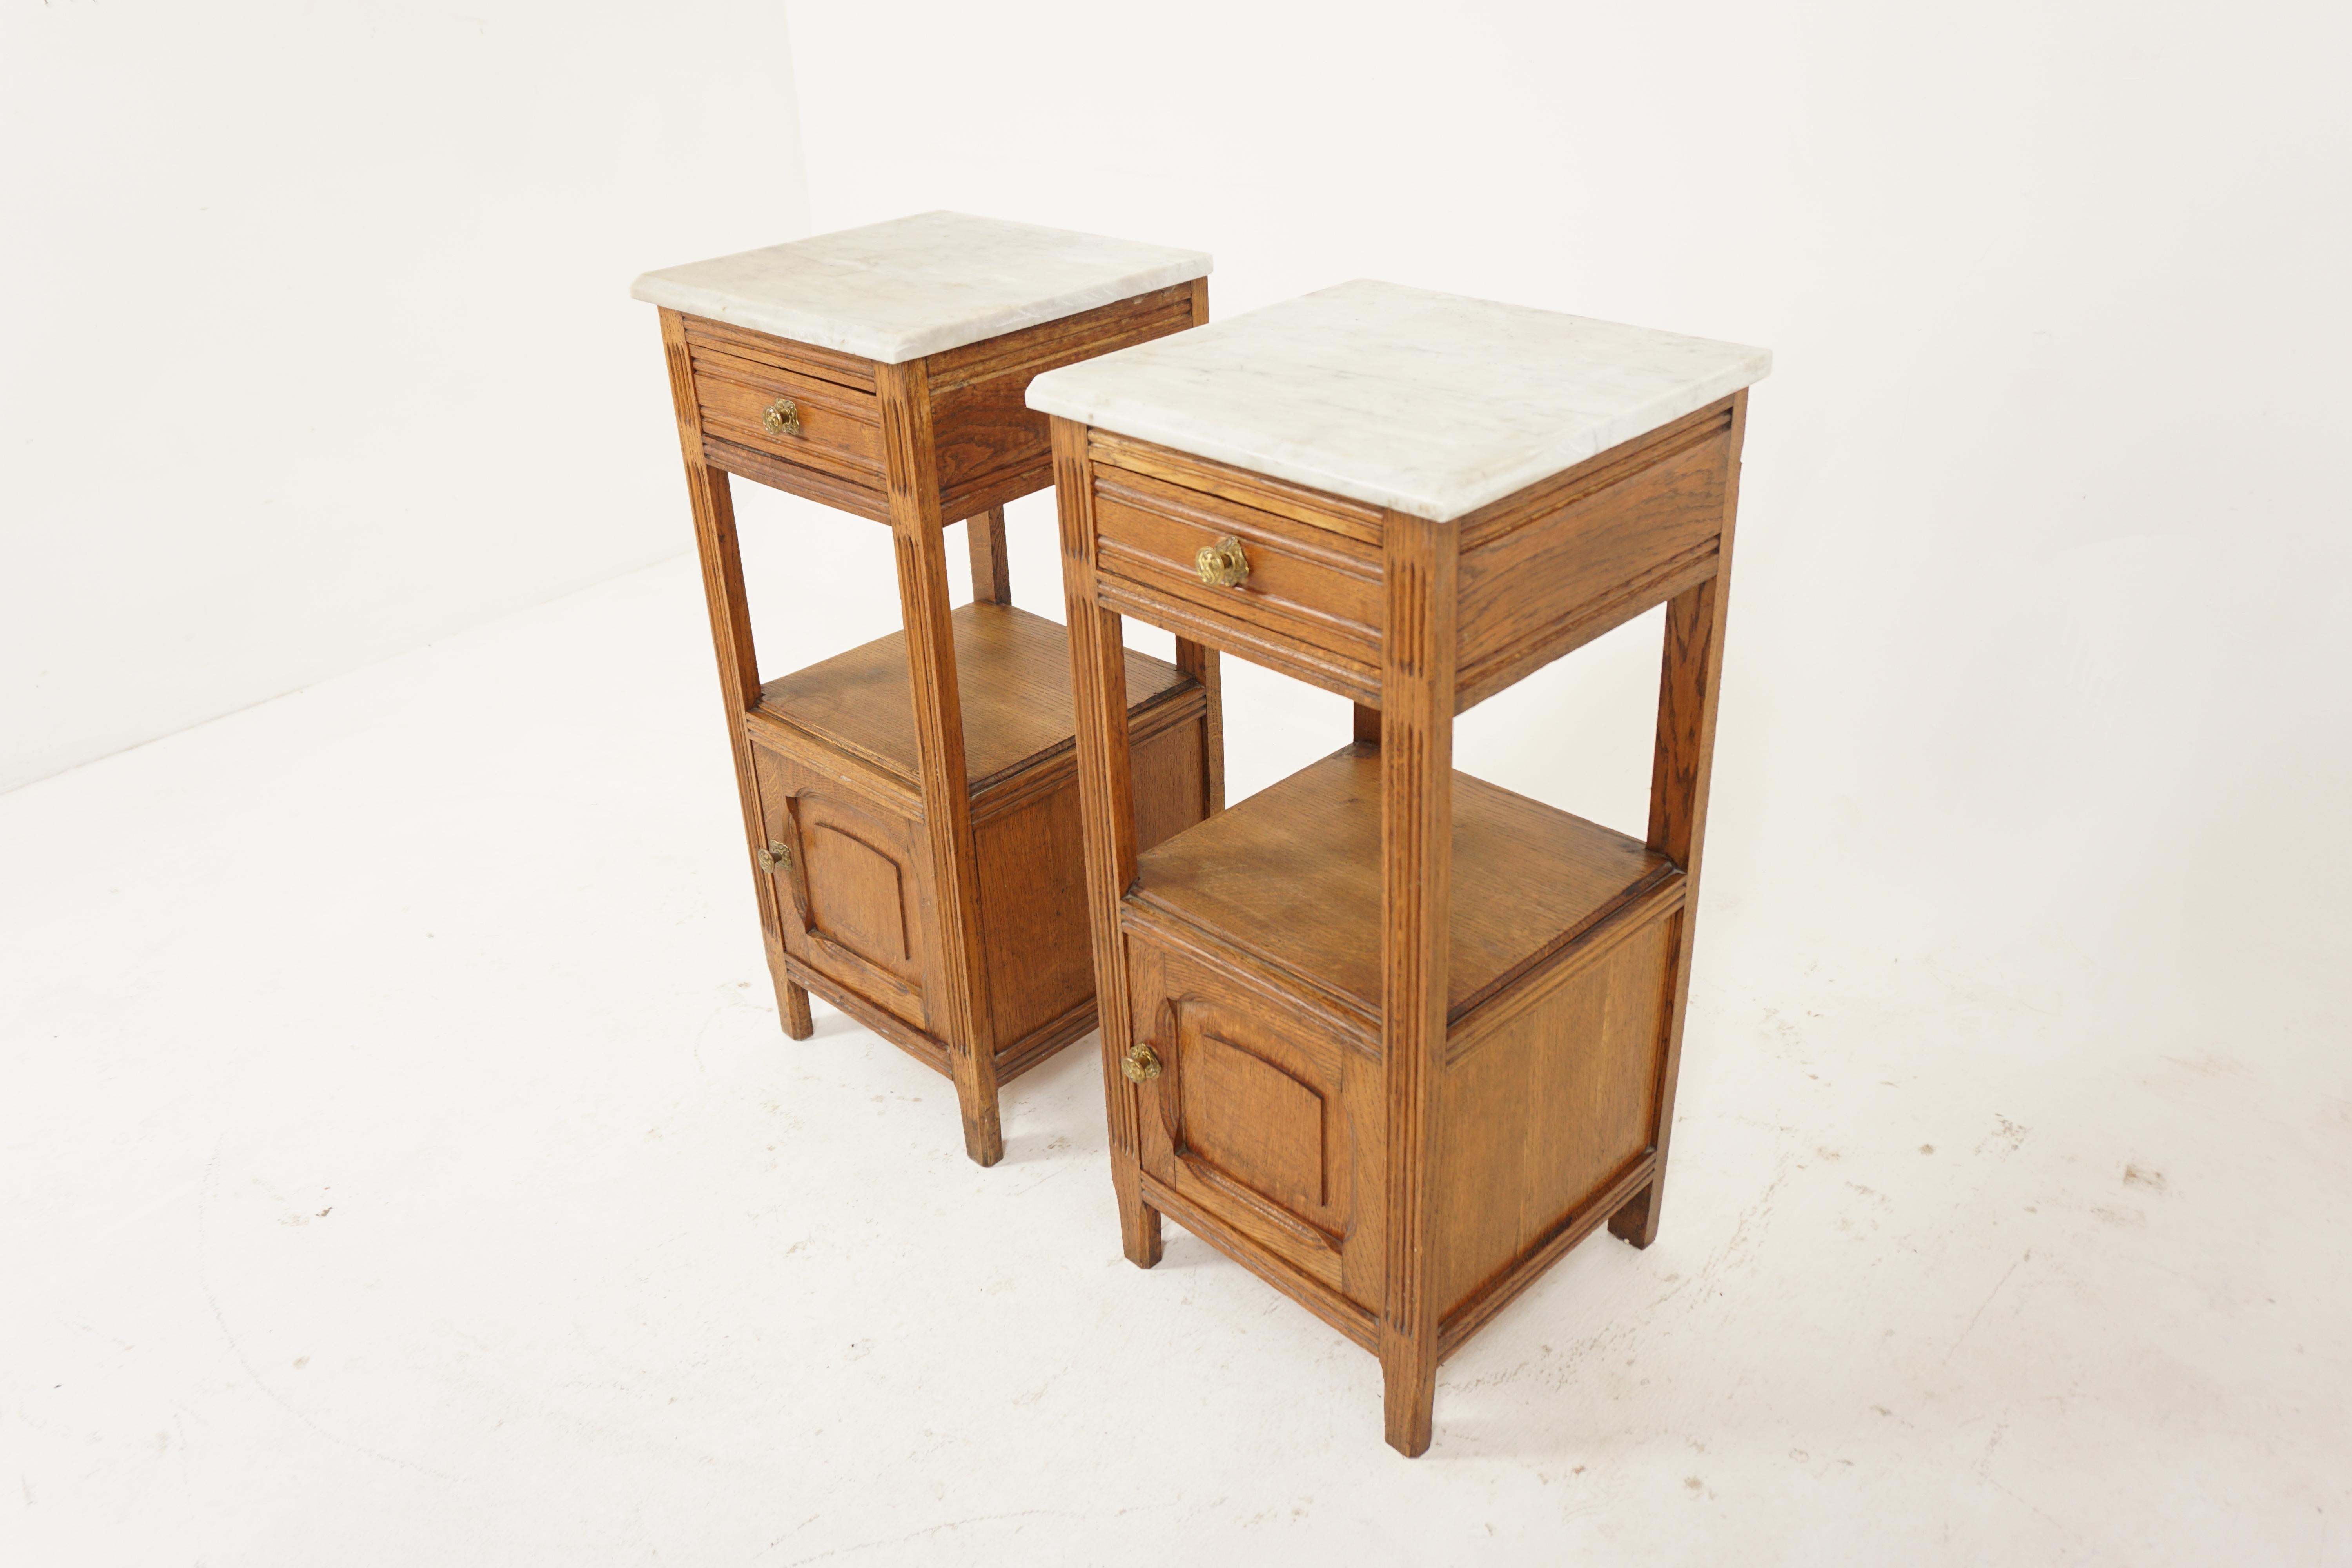 Pair of Antique French marble top oak nightstand bedside, lamp tables, France 1900, B2927

France 1900
Solid Oak
Original Finish
White marble top 
Below single beveled drawer with original brass hardware
Open shelf underneath
Single paneled